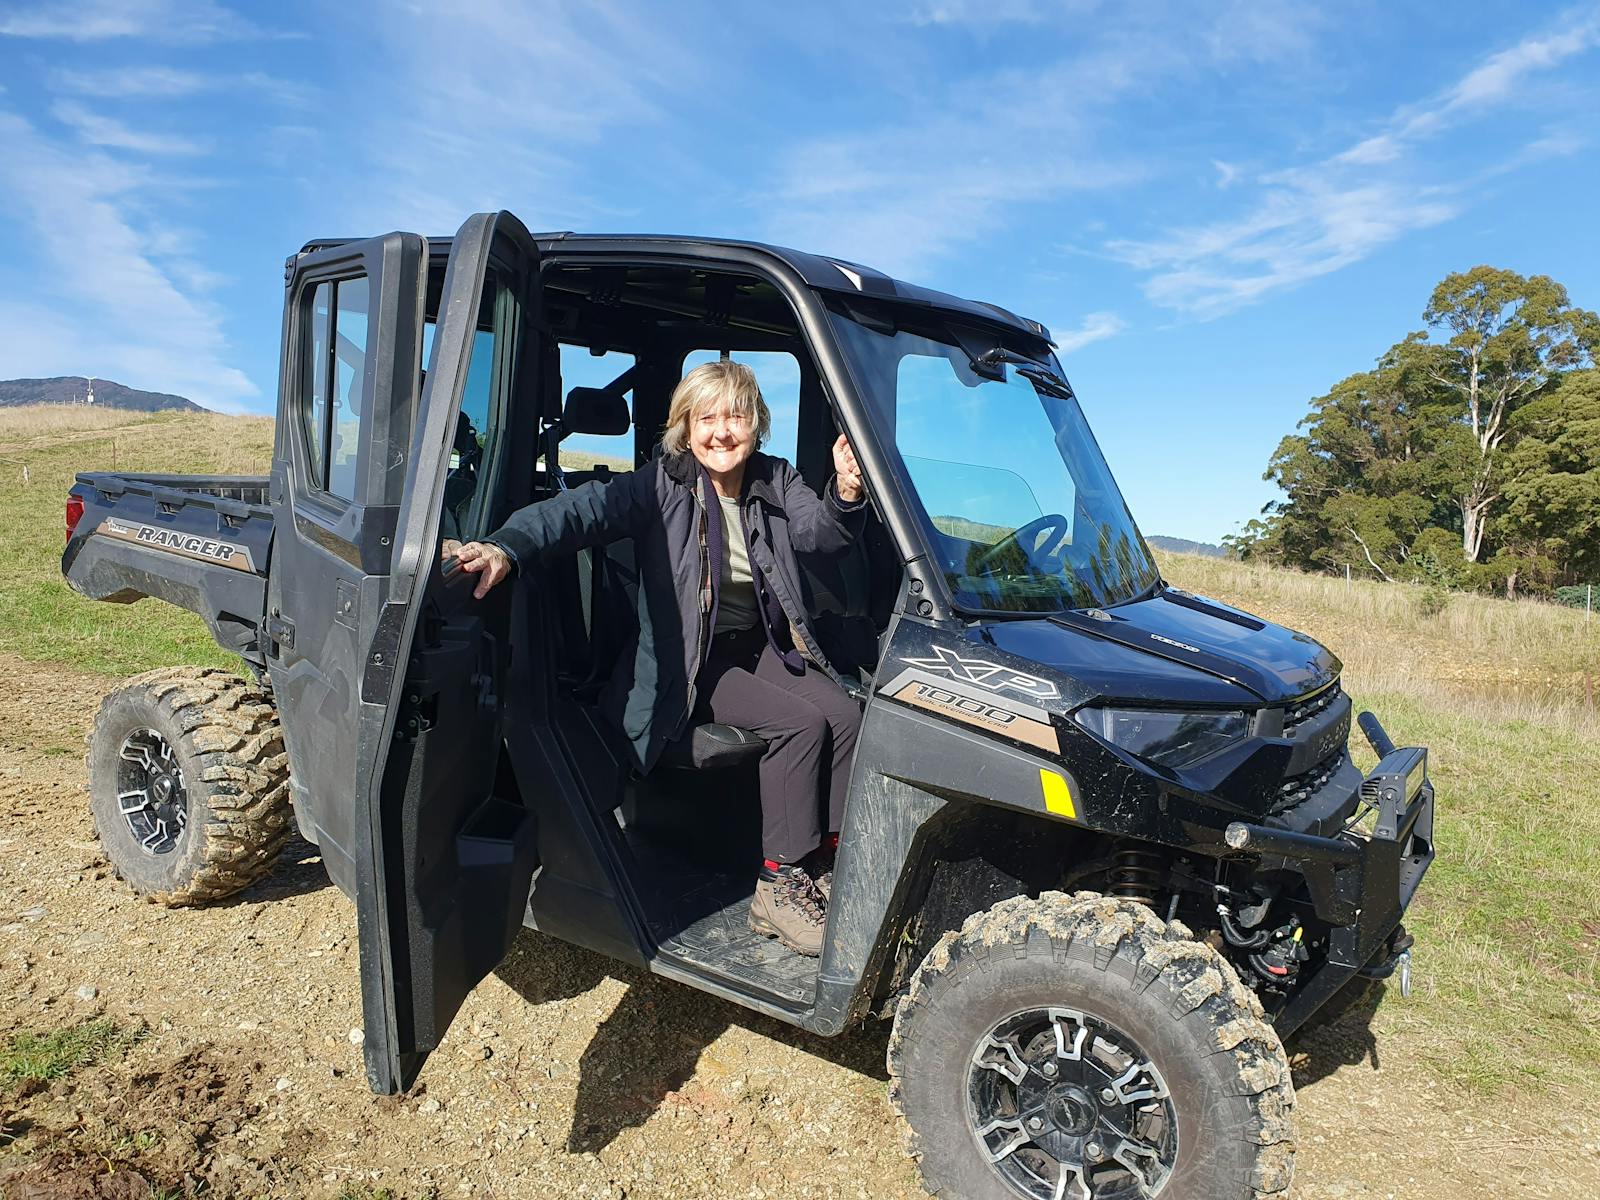 Woman sitting in all terrain vehicle with door open and smiling